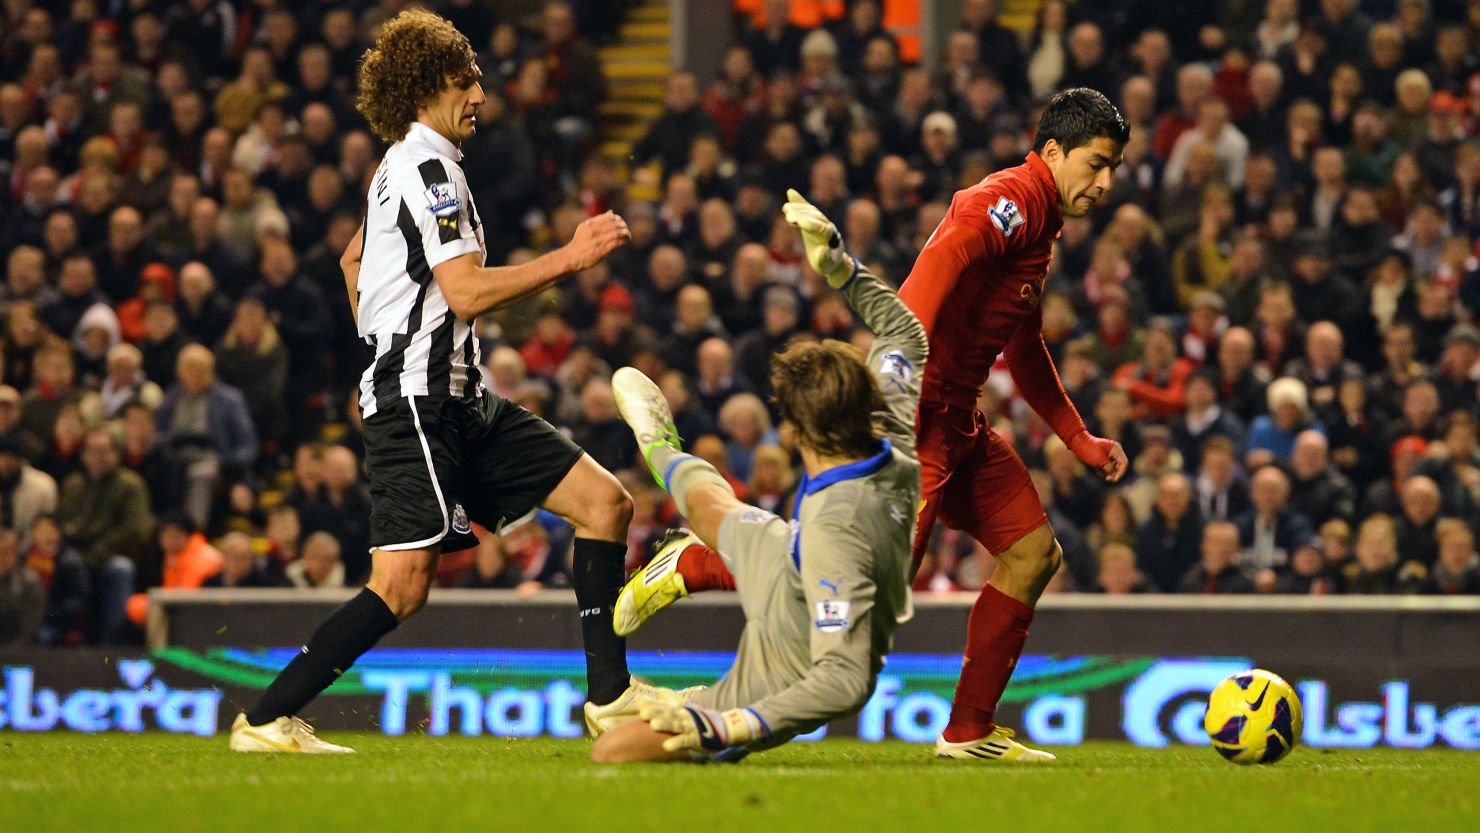 Liverpool striker Luis Suarez scores the equalizer against Newcastle after evading Fabricio Coloccini and goalkeeper Tim Krul.